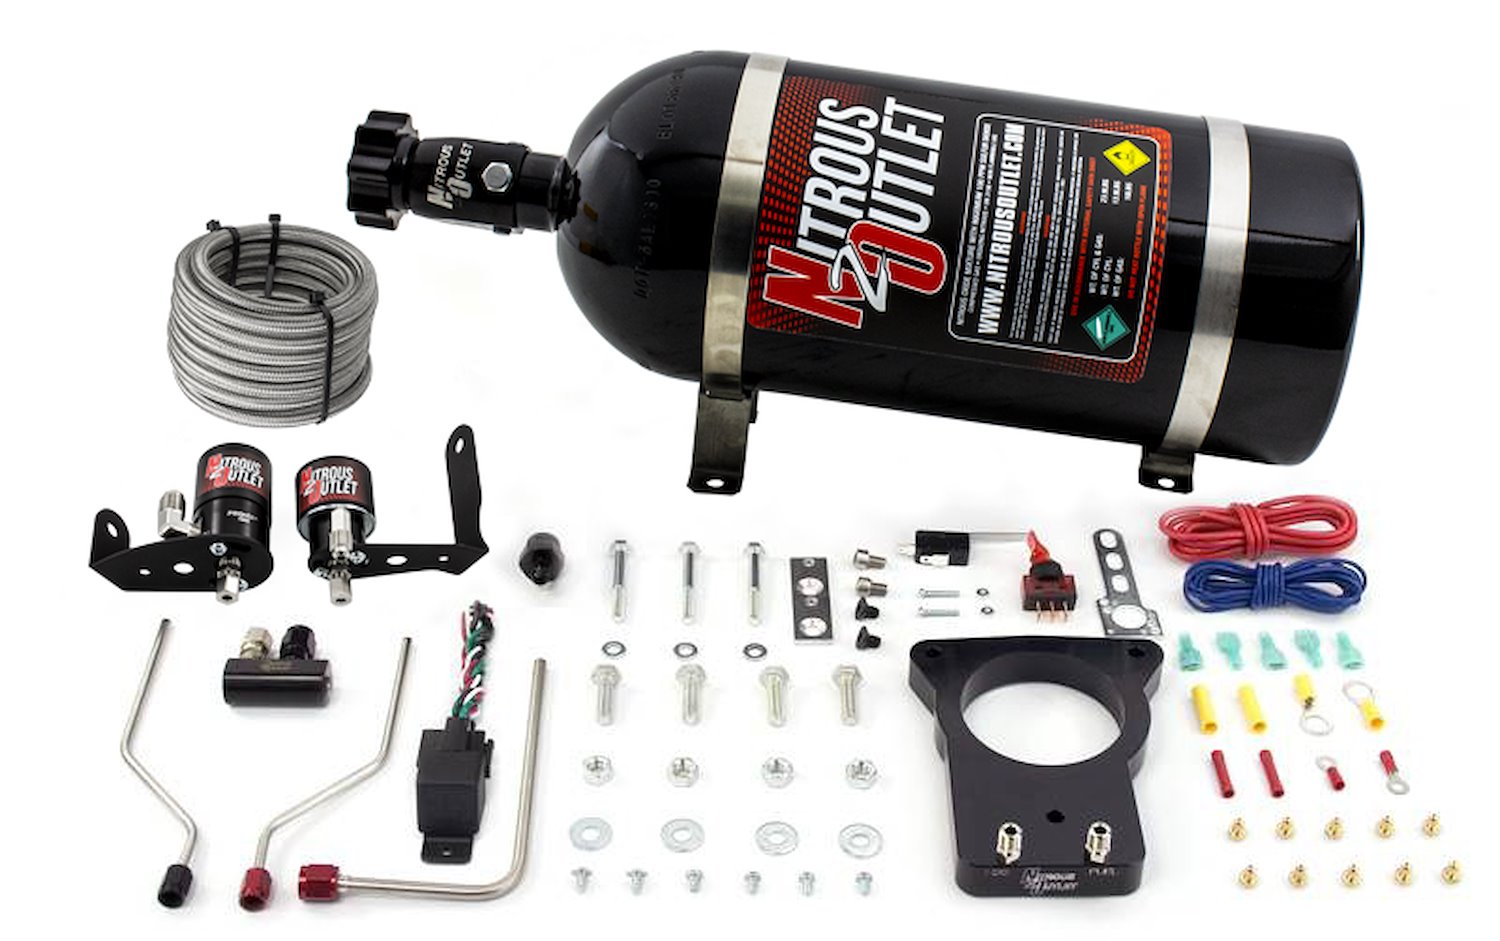 00-10126-78-10 Cadillac 78 mm 2004-2005 CTS-V Hard-Line Plate System, Gas/E85, 5-55psi, 50-200HP, 10lb Bottle